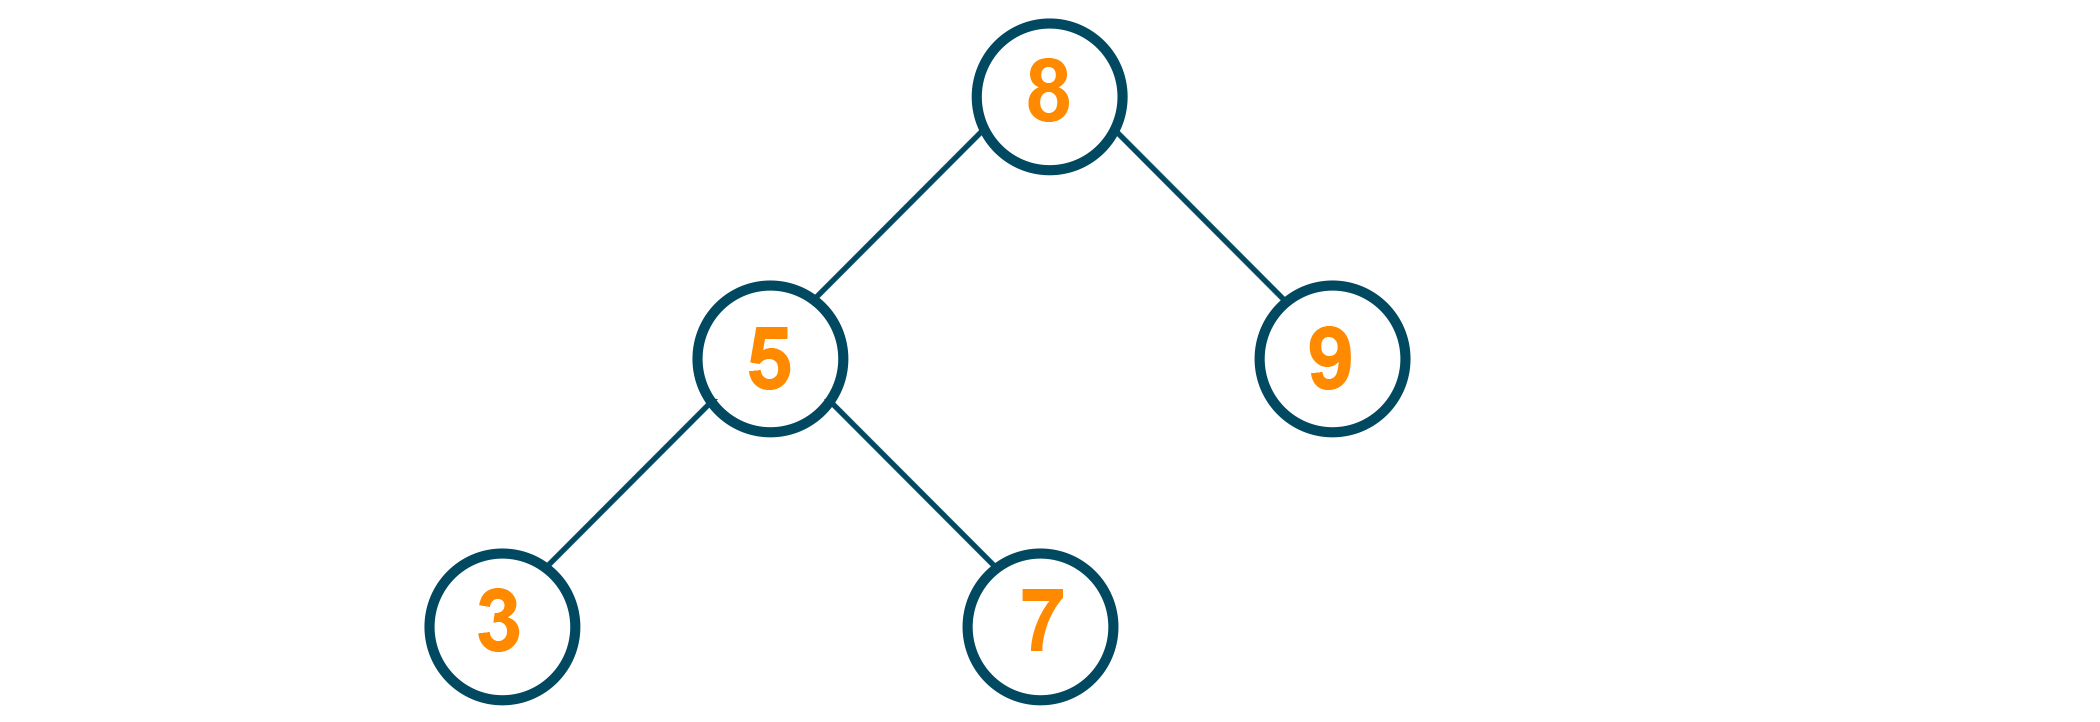 Binary search tree deletion example